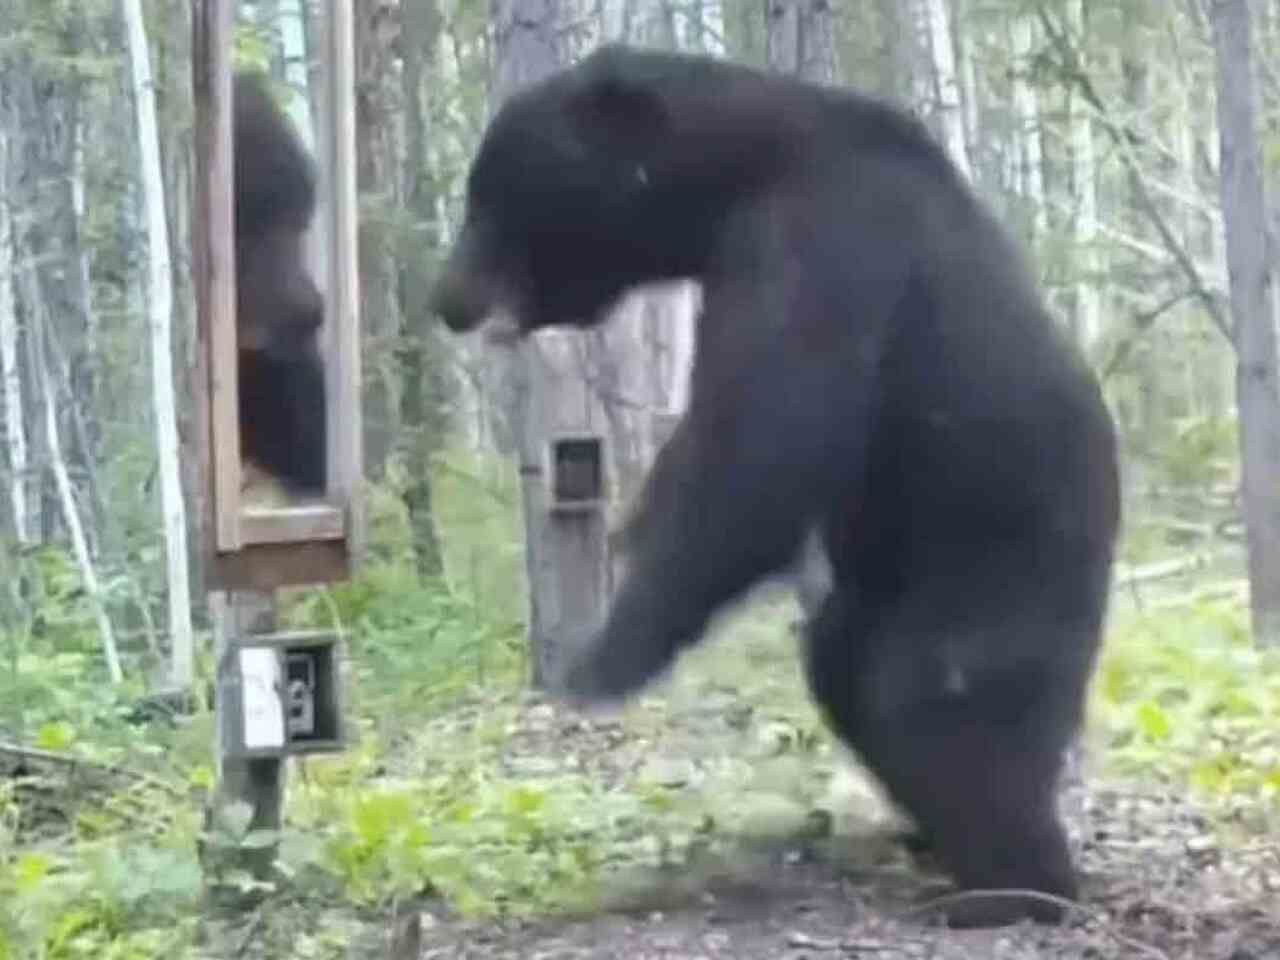 Bear Goes Crazy Seeing Its Own Reflection in the Mirror; Watch the Video